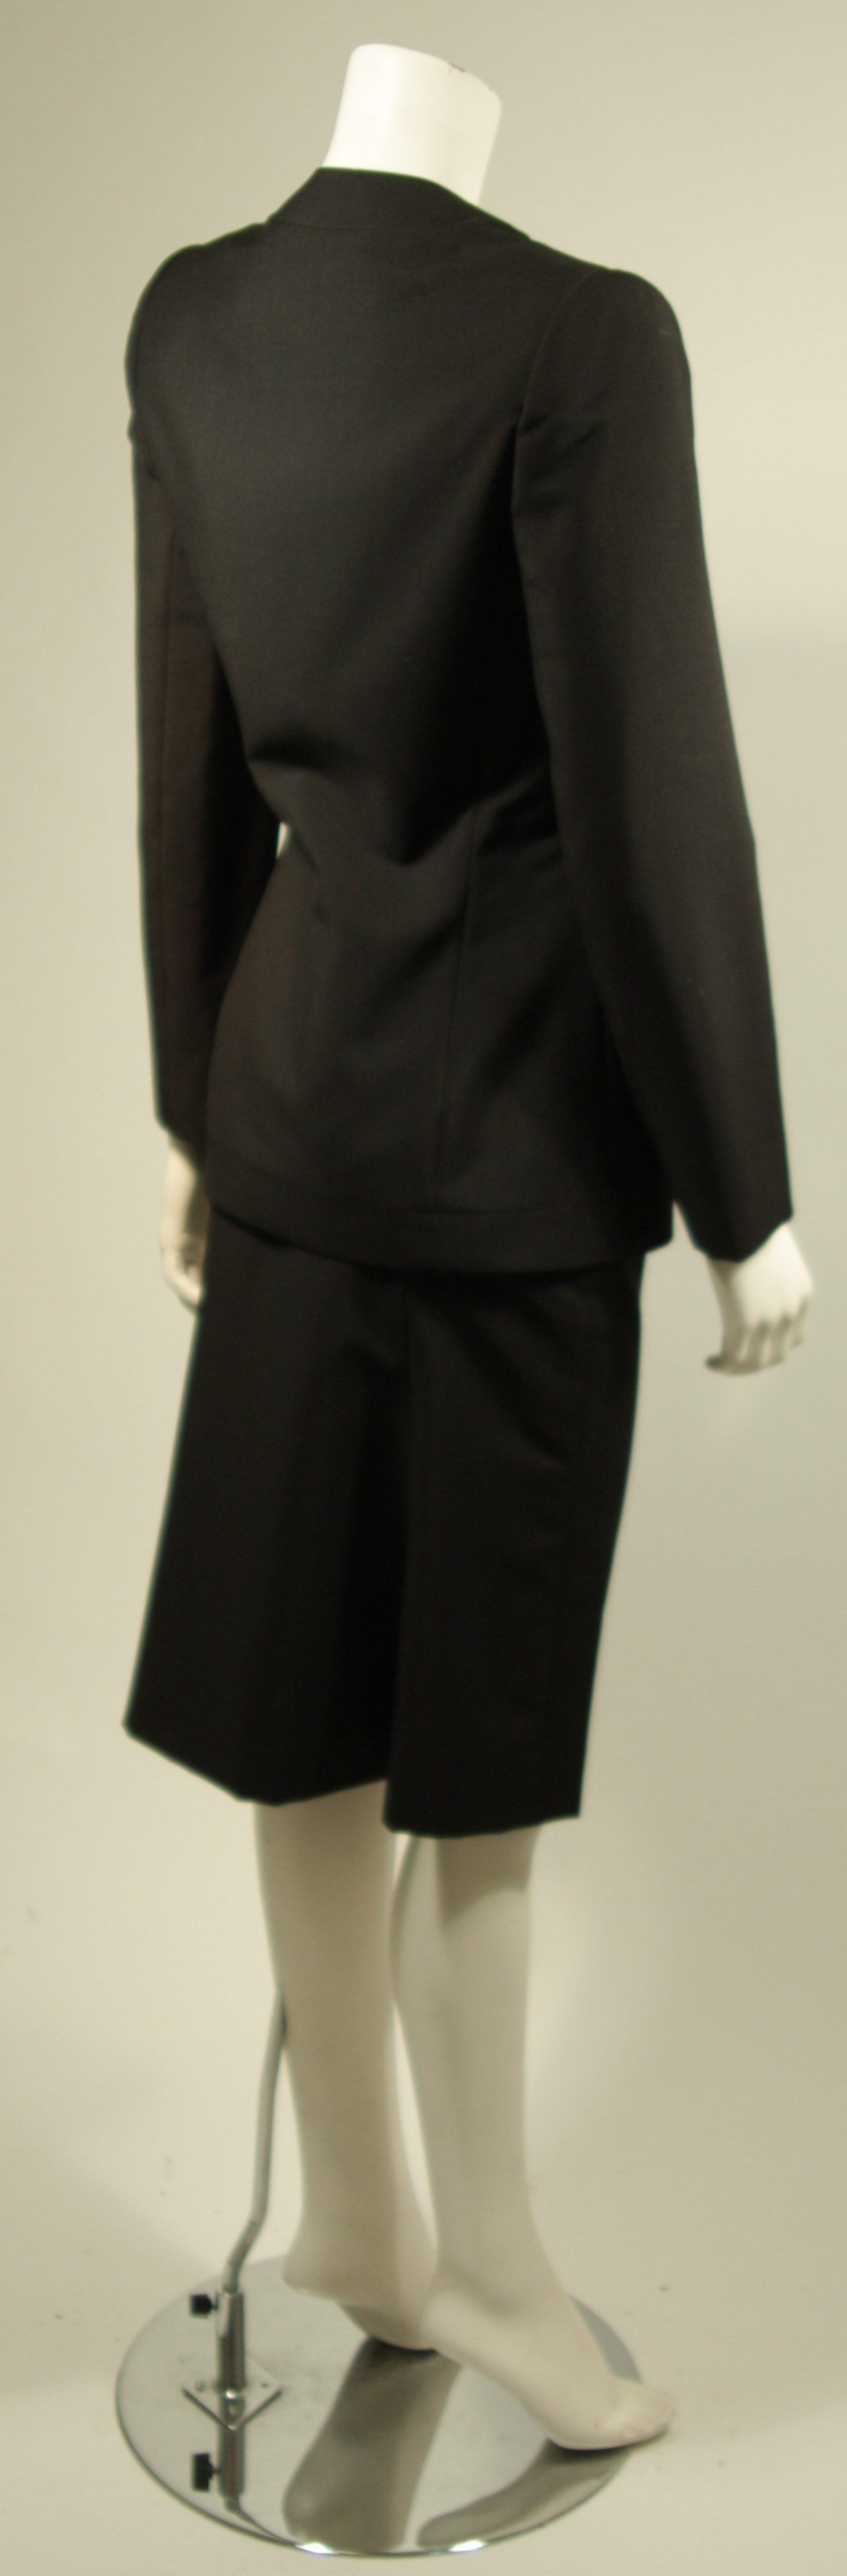 GALANOS HAUTE COUTURE Betsy Bloomingdale Black Skirt Suit with Cut-Out Details 2